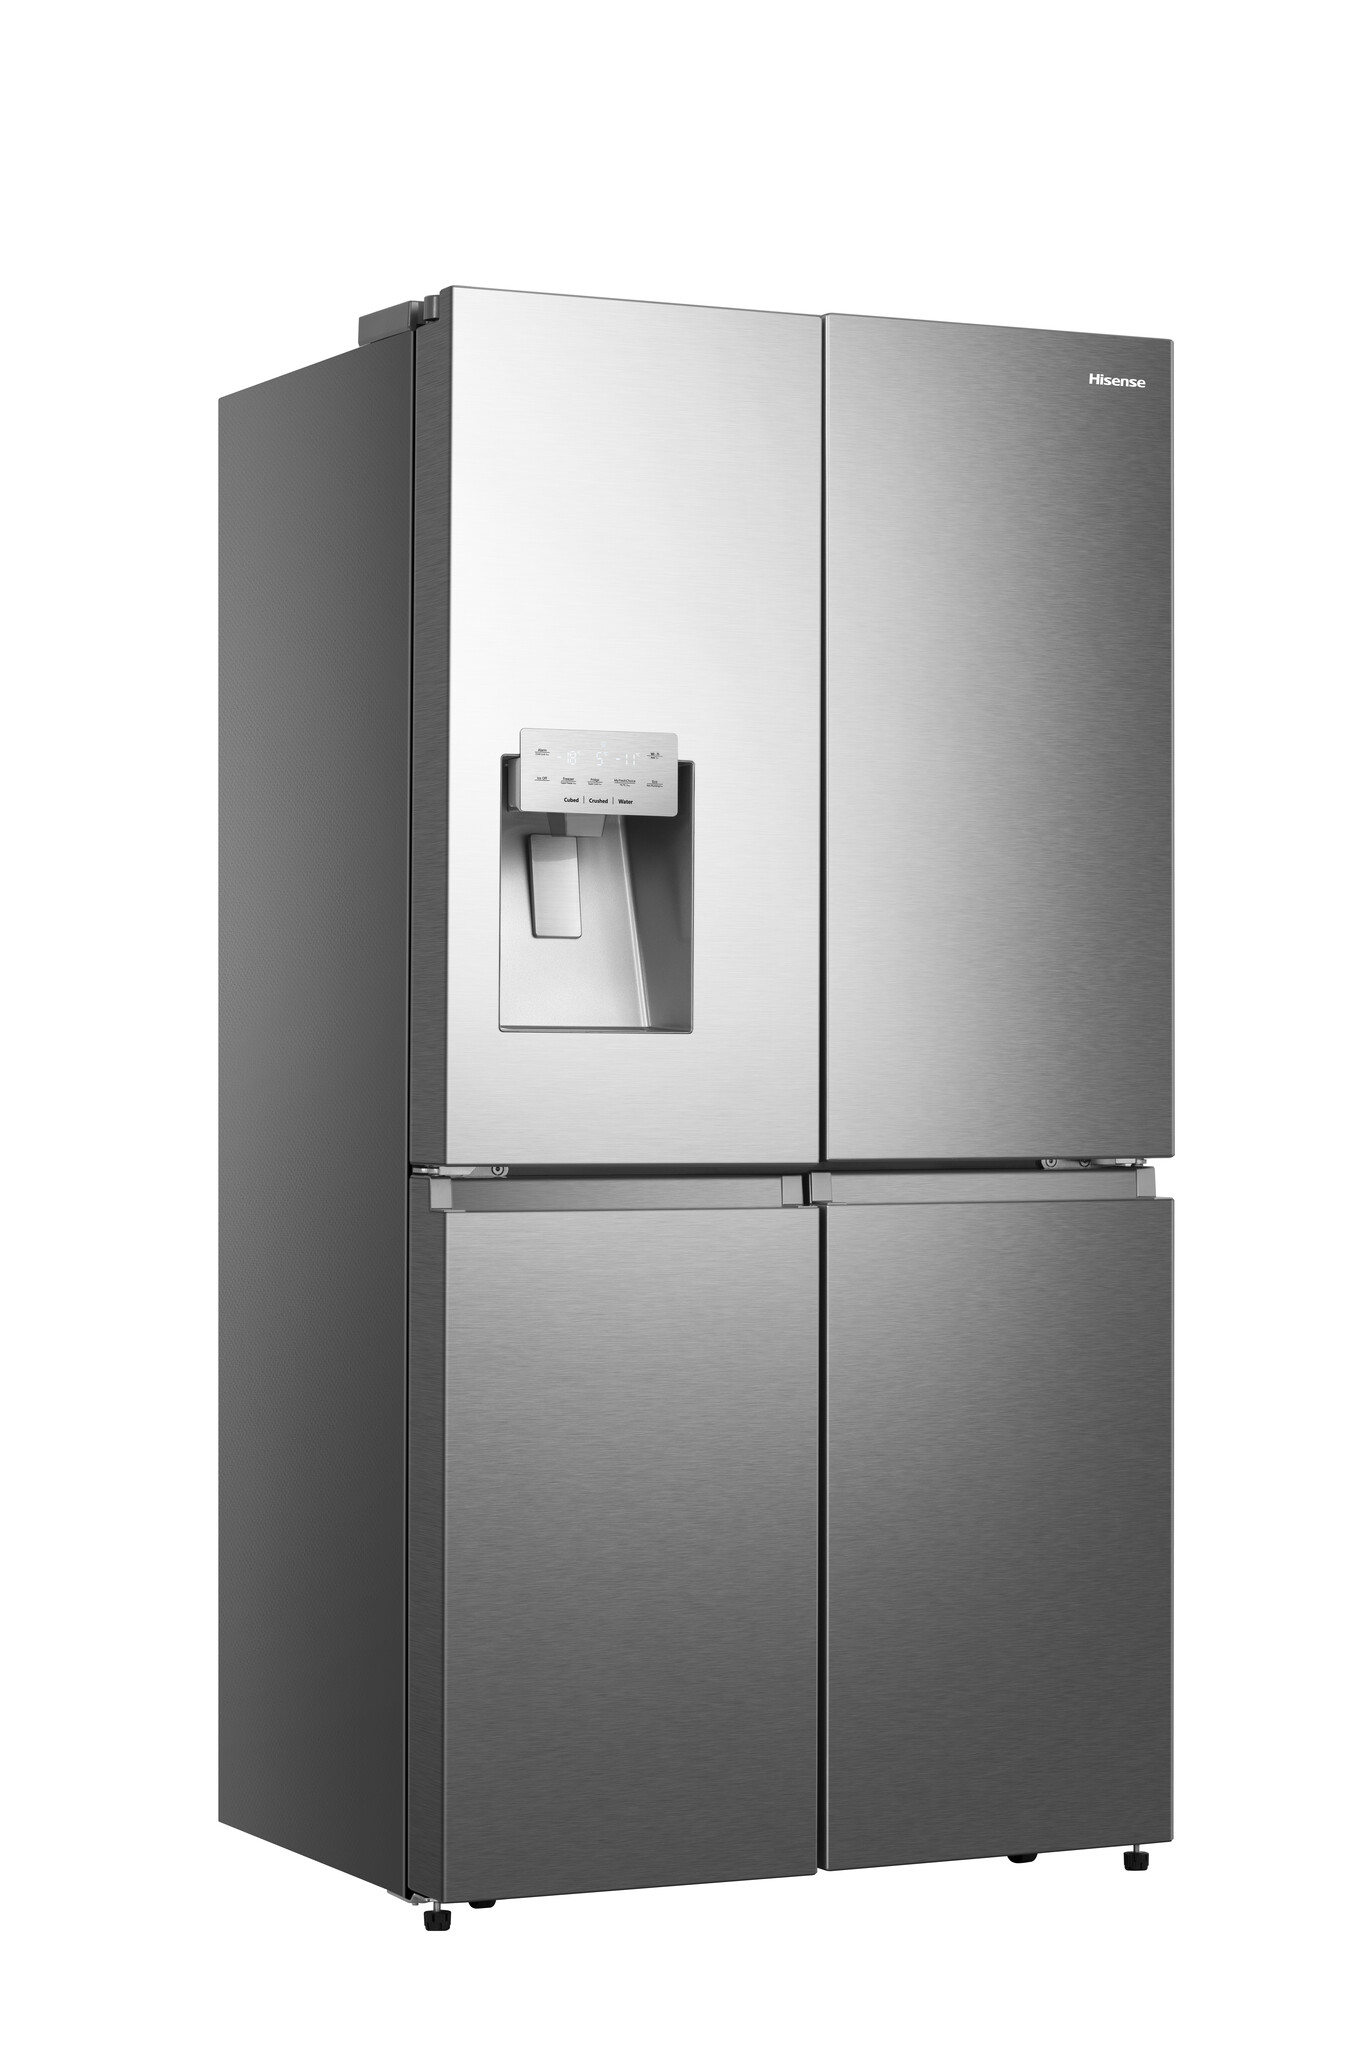 Hisense RQ760N4SASE Wifi Connected Non-Plumbed Total No Frost American Fridge Freezer – Stainless Steel – E Rated #364675